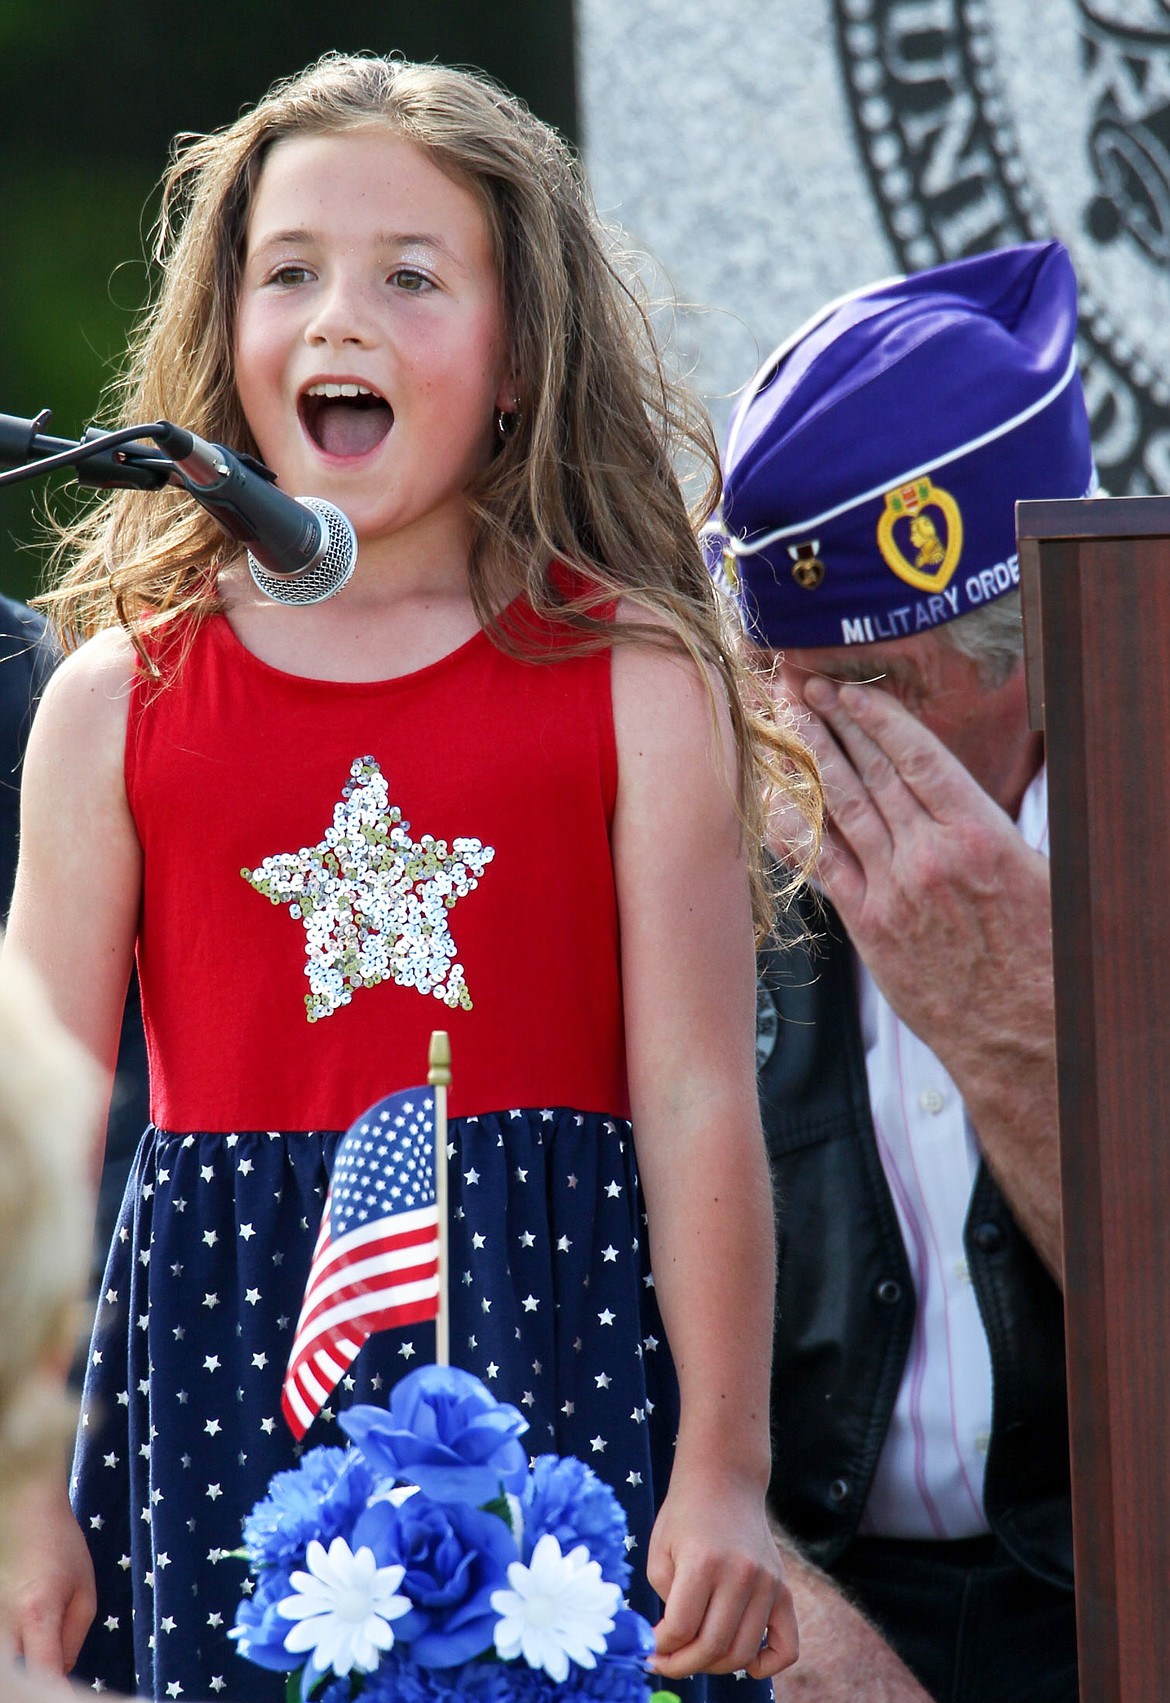 Madison Vincent, 10, sings &#147;Didn&#146;t I?&#148; by Montgomery Gentry at a Memorial Day ceremony at the Veterans Memorial in Libby Monday evening, May 29, 2017. (John Blodgett/The Western News)